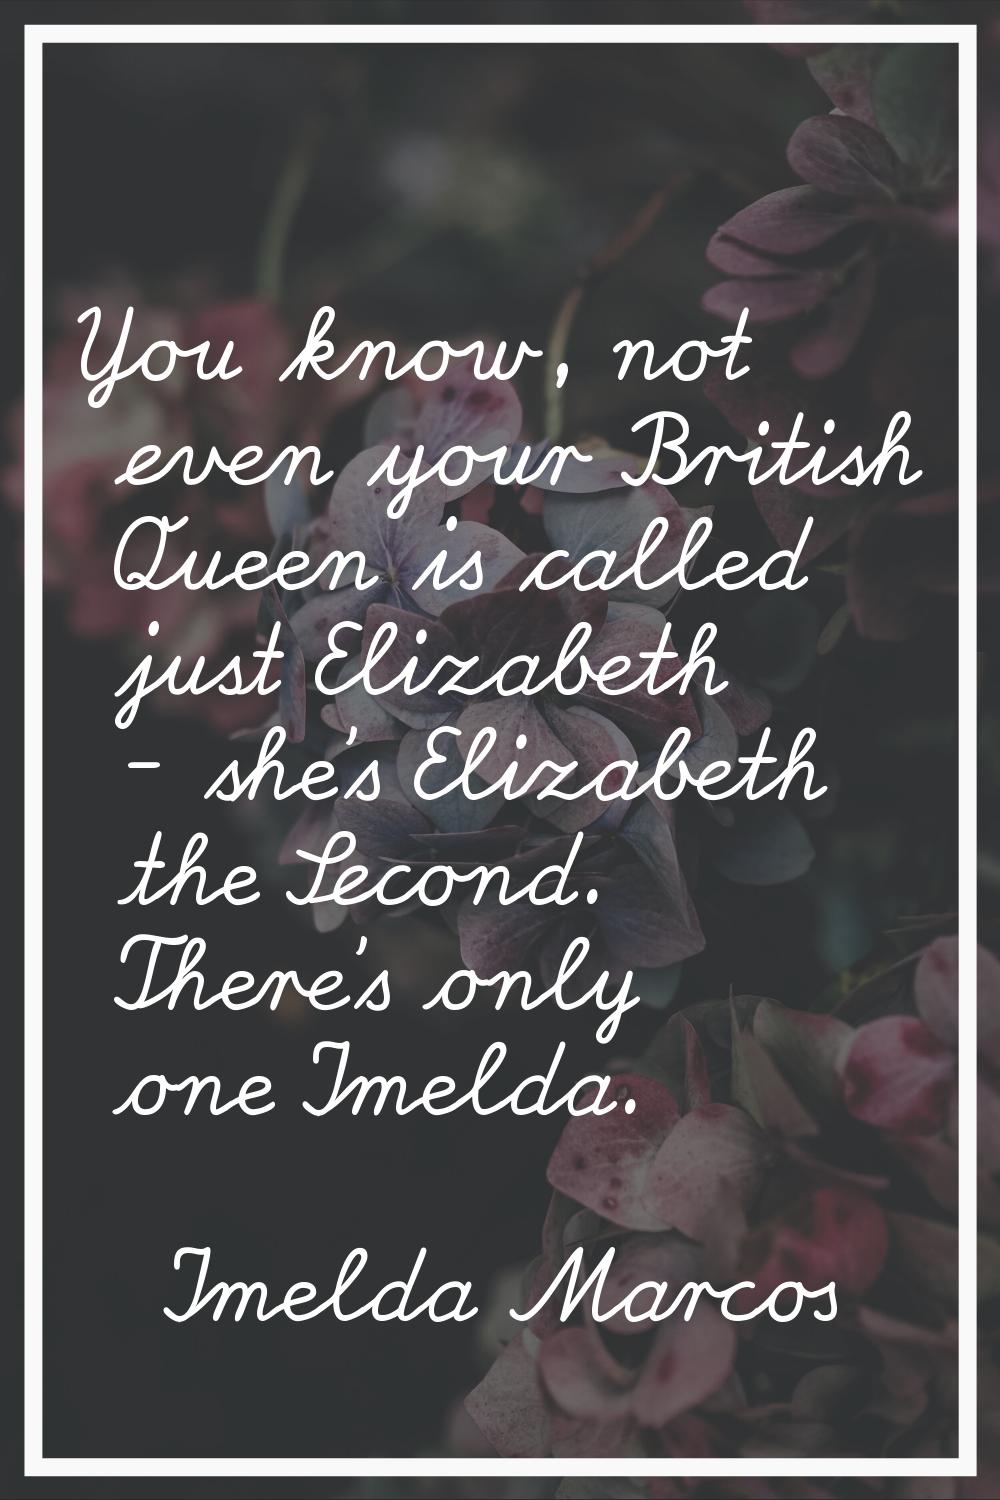 You know, not even your British Queen is called just Elizabeth - she's Elizabeth the Second. There'